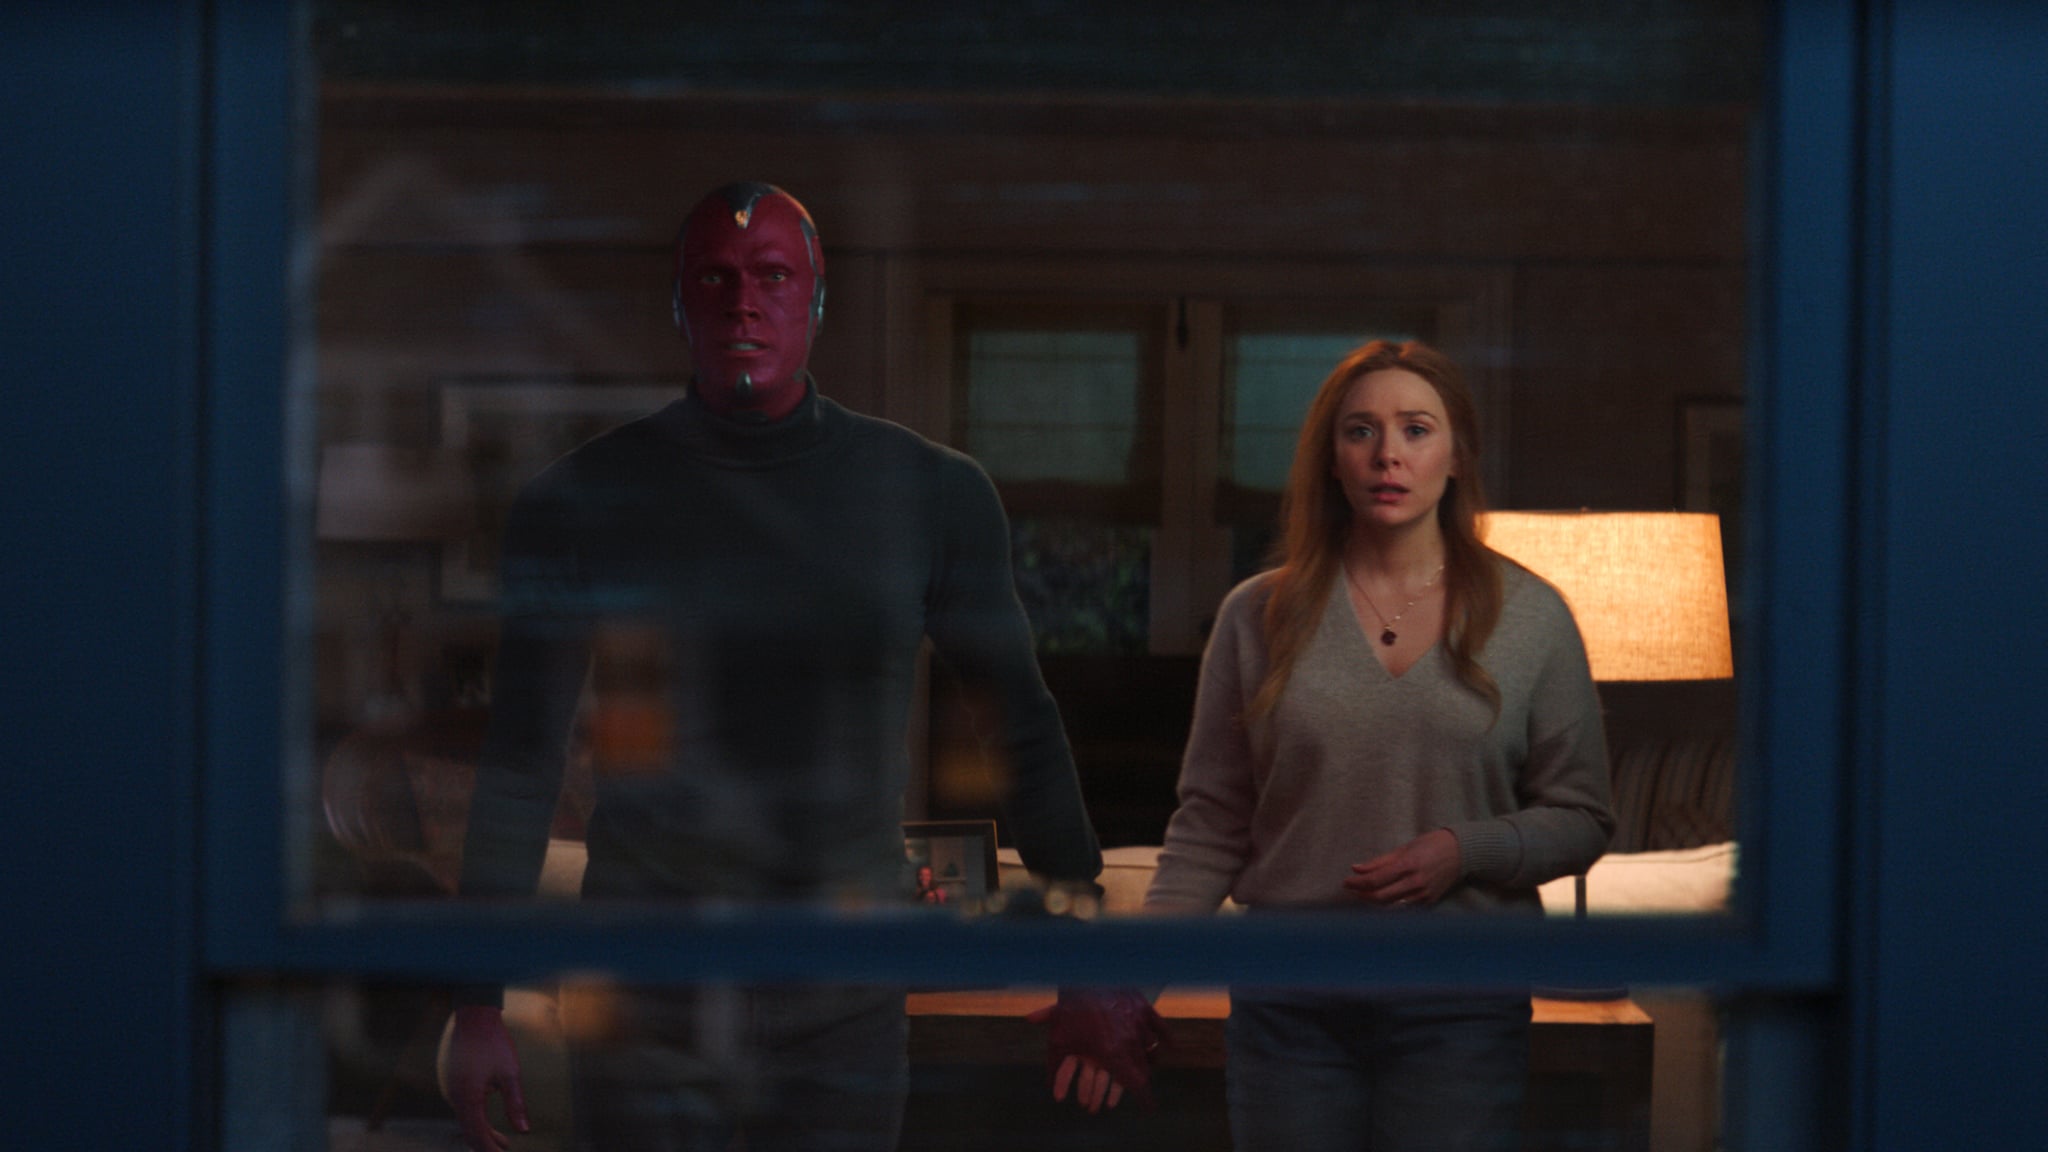 Paul Bettany as Vision and Elizabeth Olsen as Wanda Maximoff in Marvel Studios' WANDAVISION exclusively on Disney+. Photo courtesy of Marvel Studios. ©Marvel Studios 2021. All Rights Reserved.